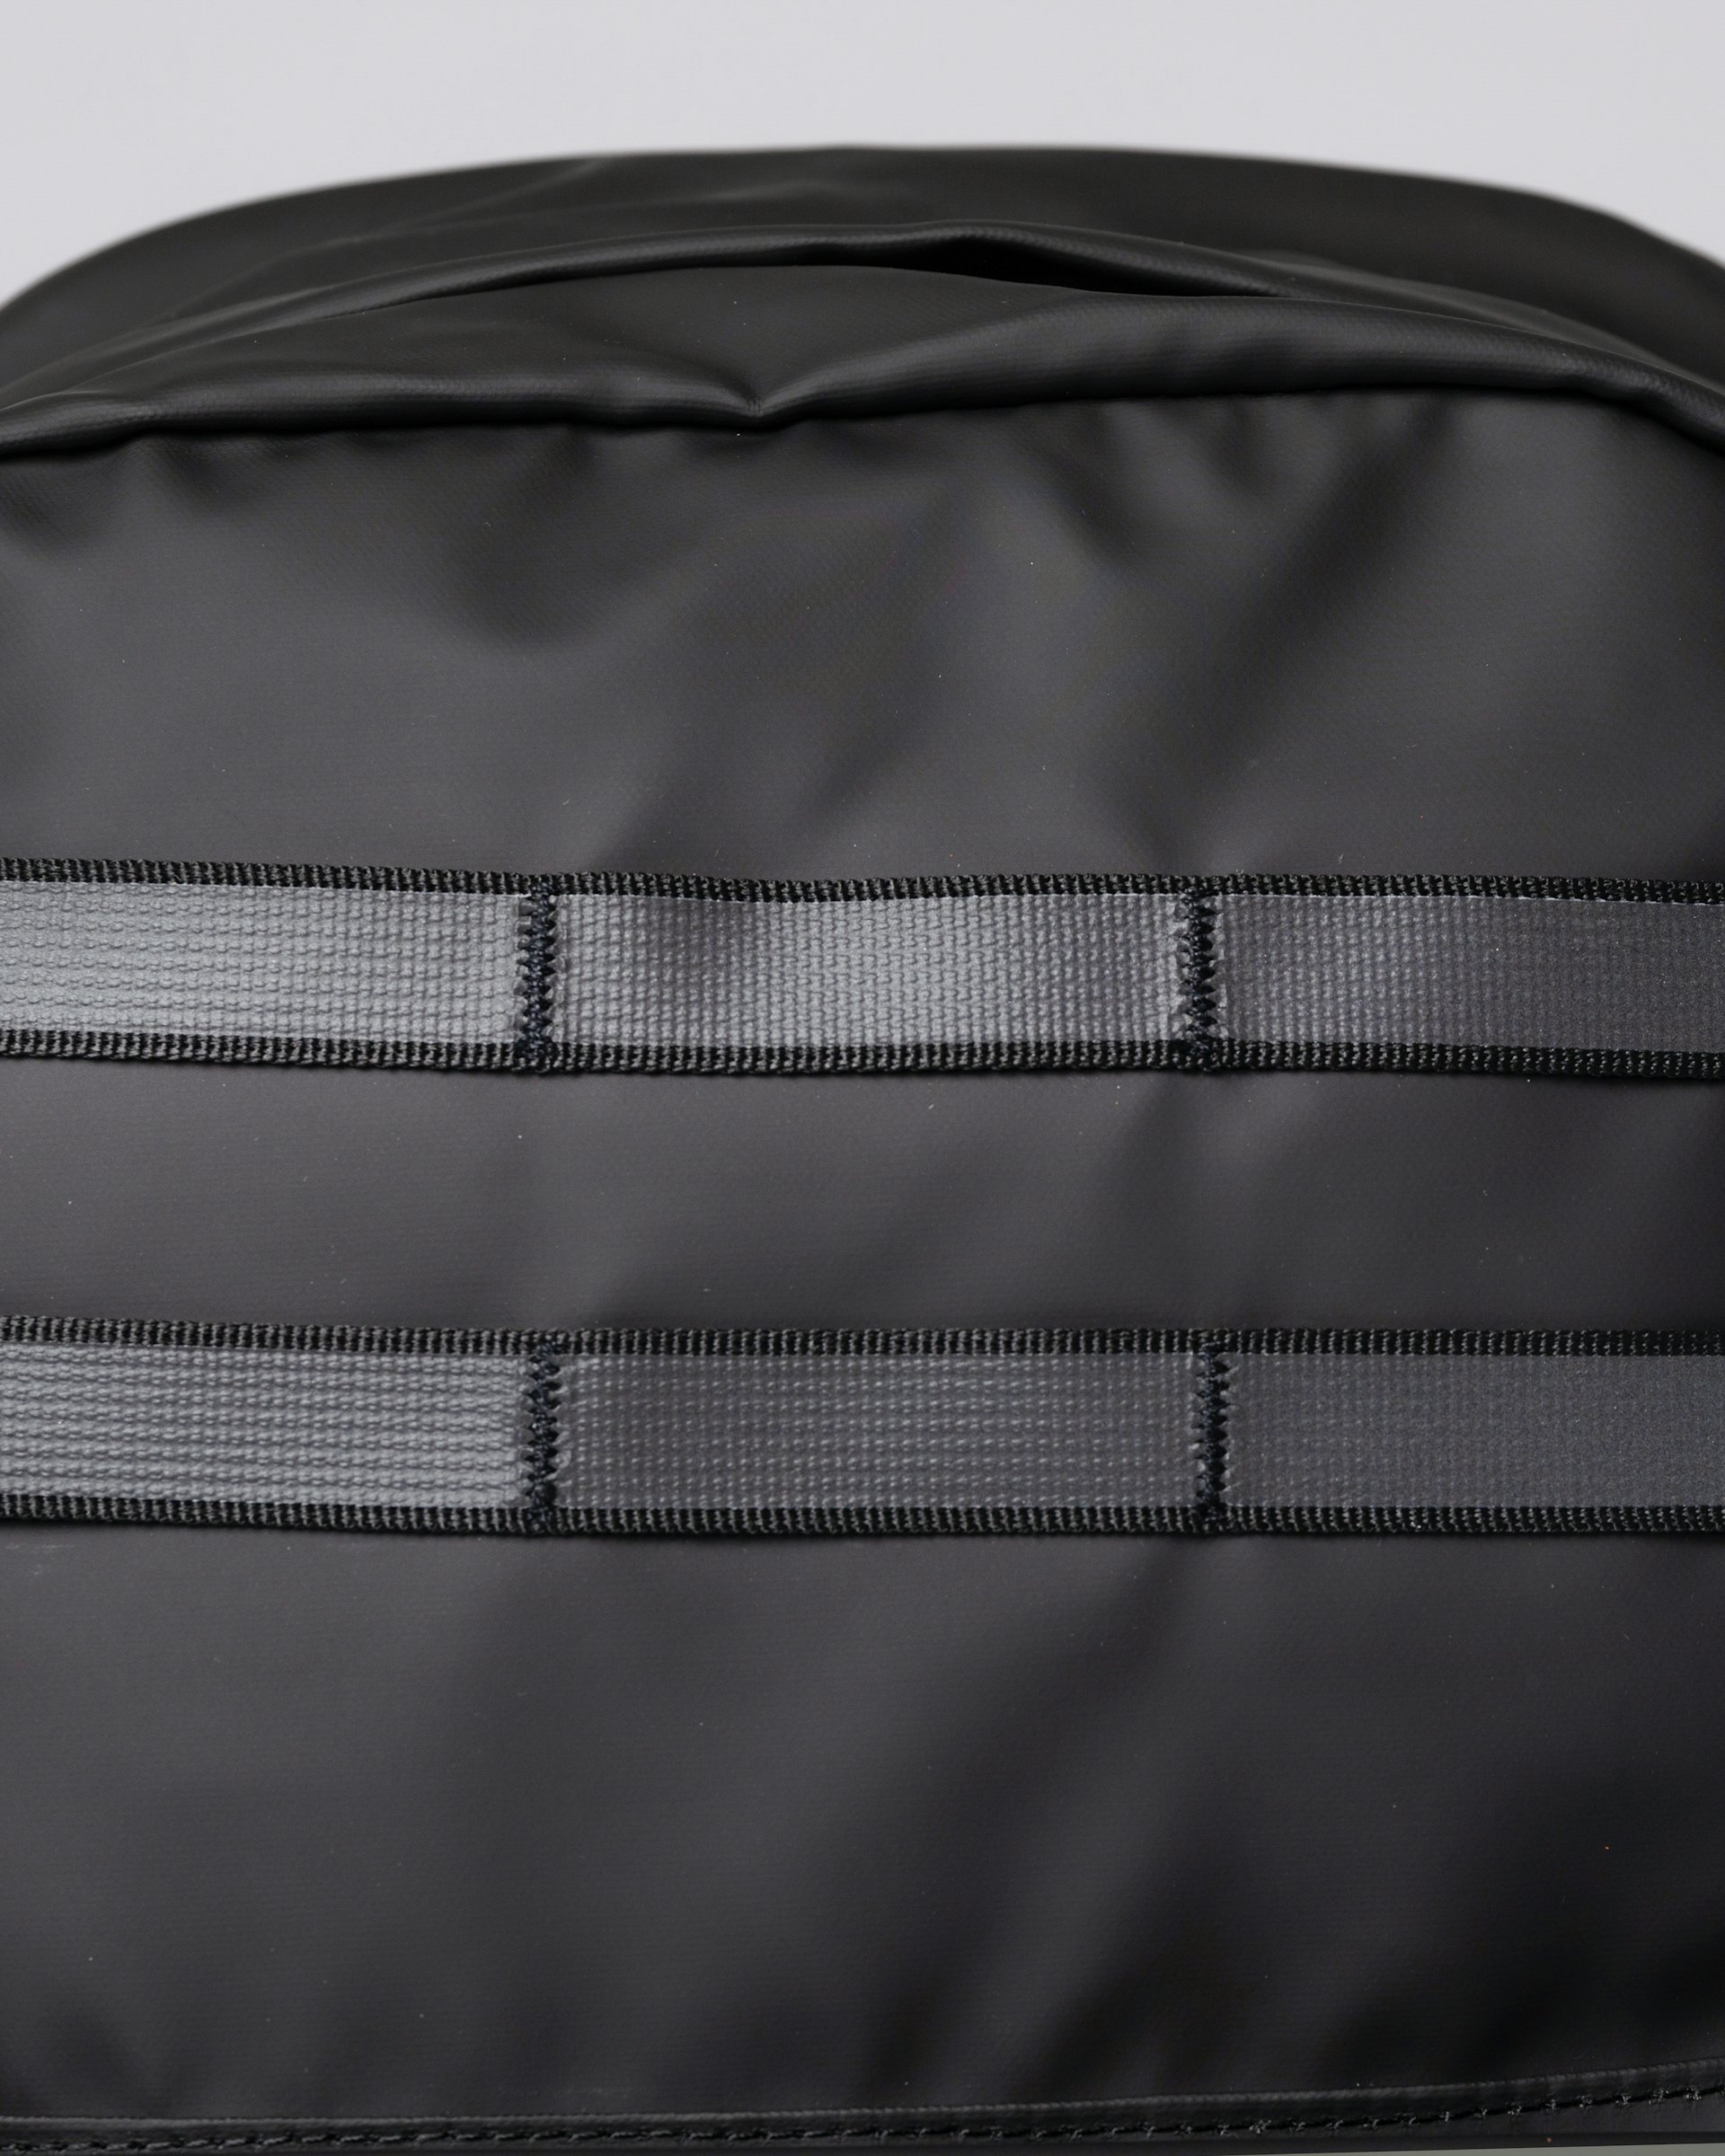 Alvar belongs to the category Backpacks and is in color black (2 of 6)